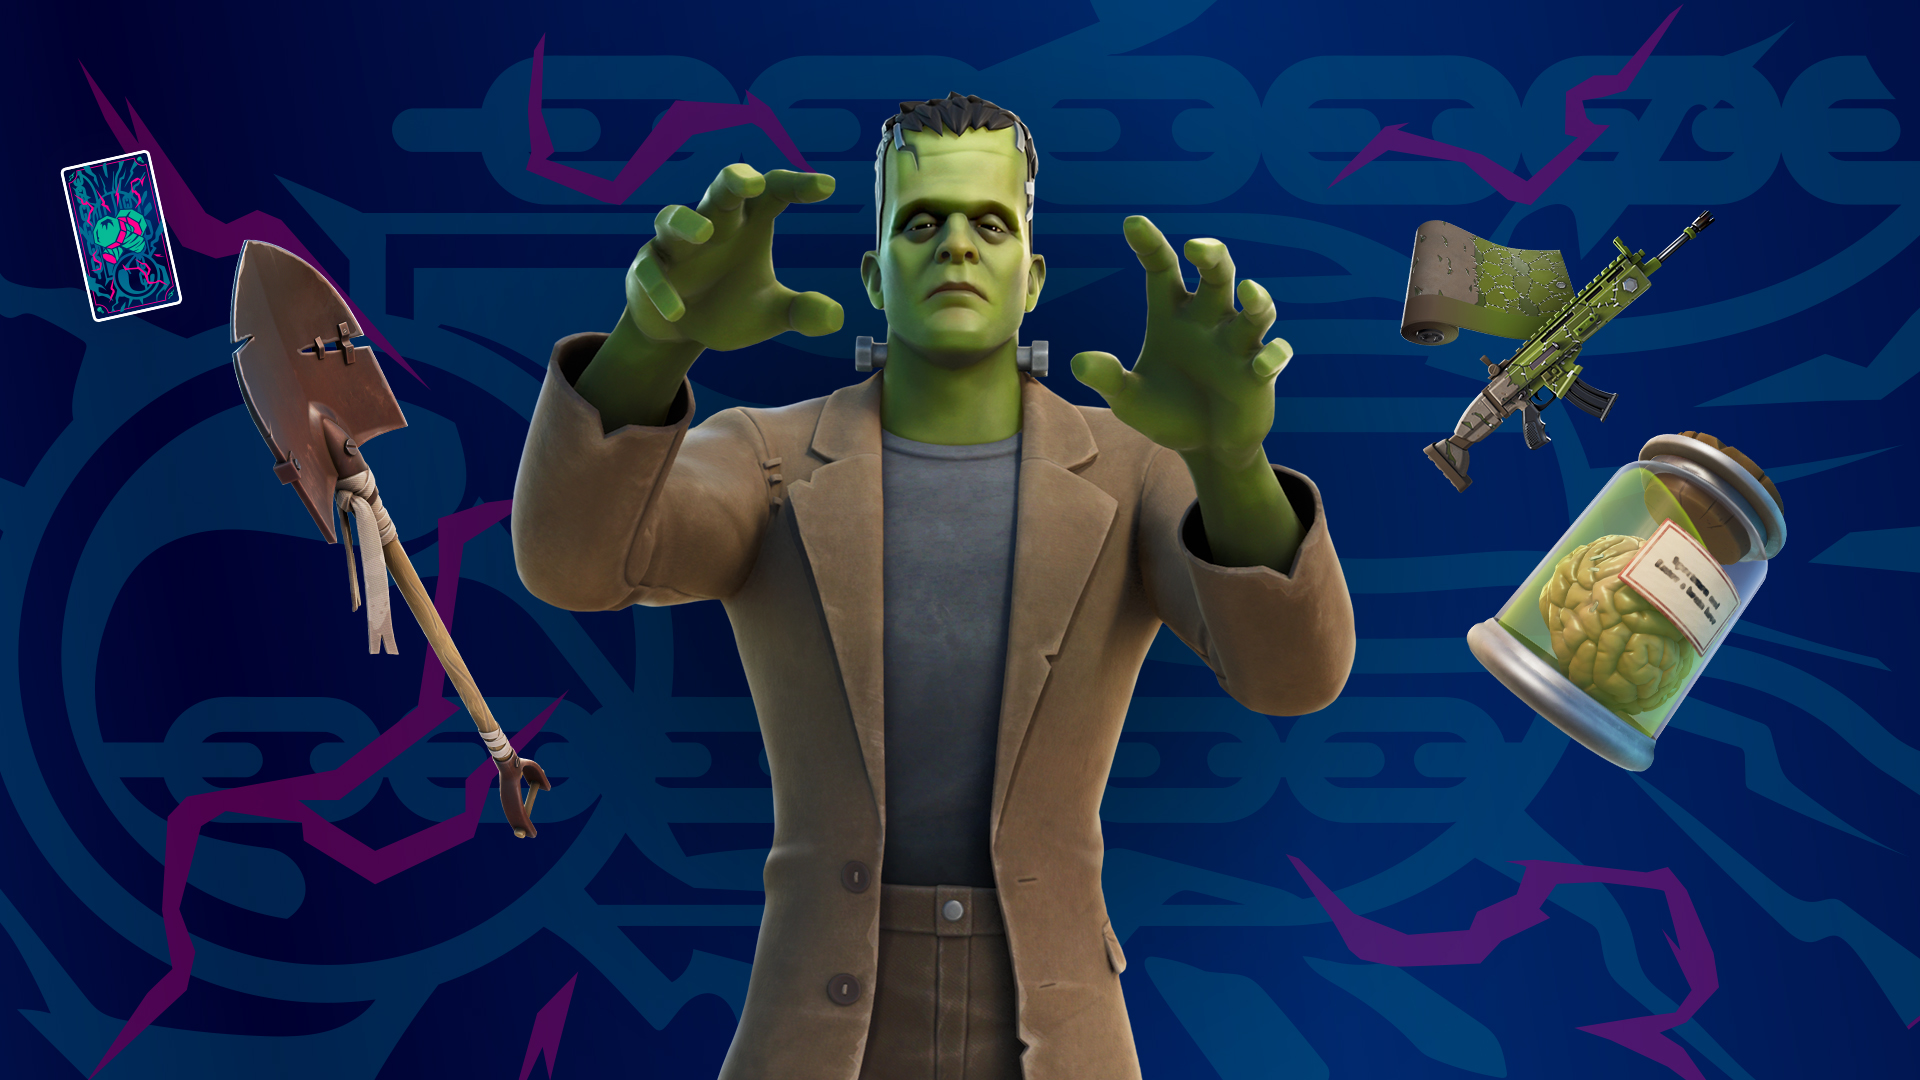 fortnitemares 2021 - frankenstein's monster surrounded by some items